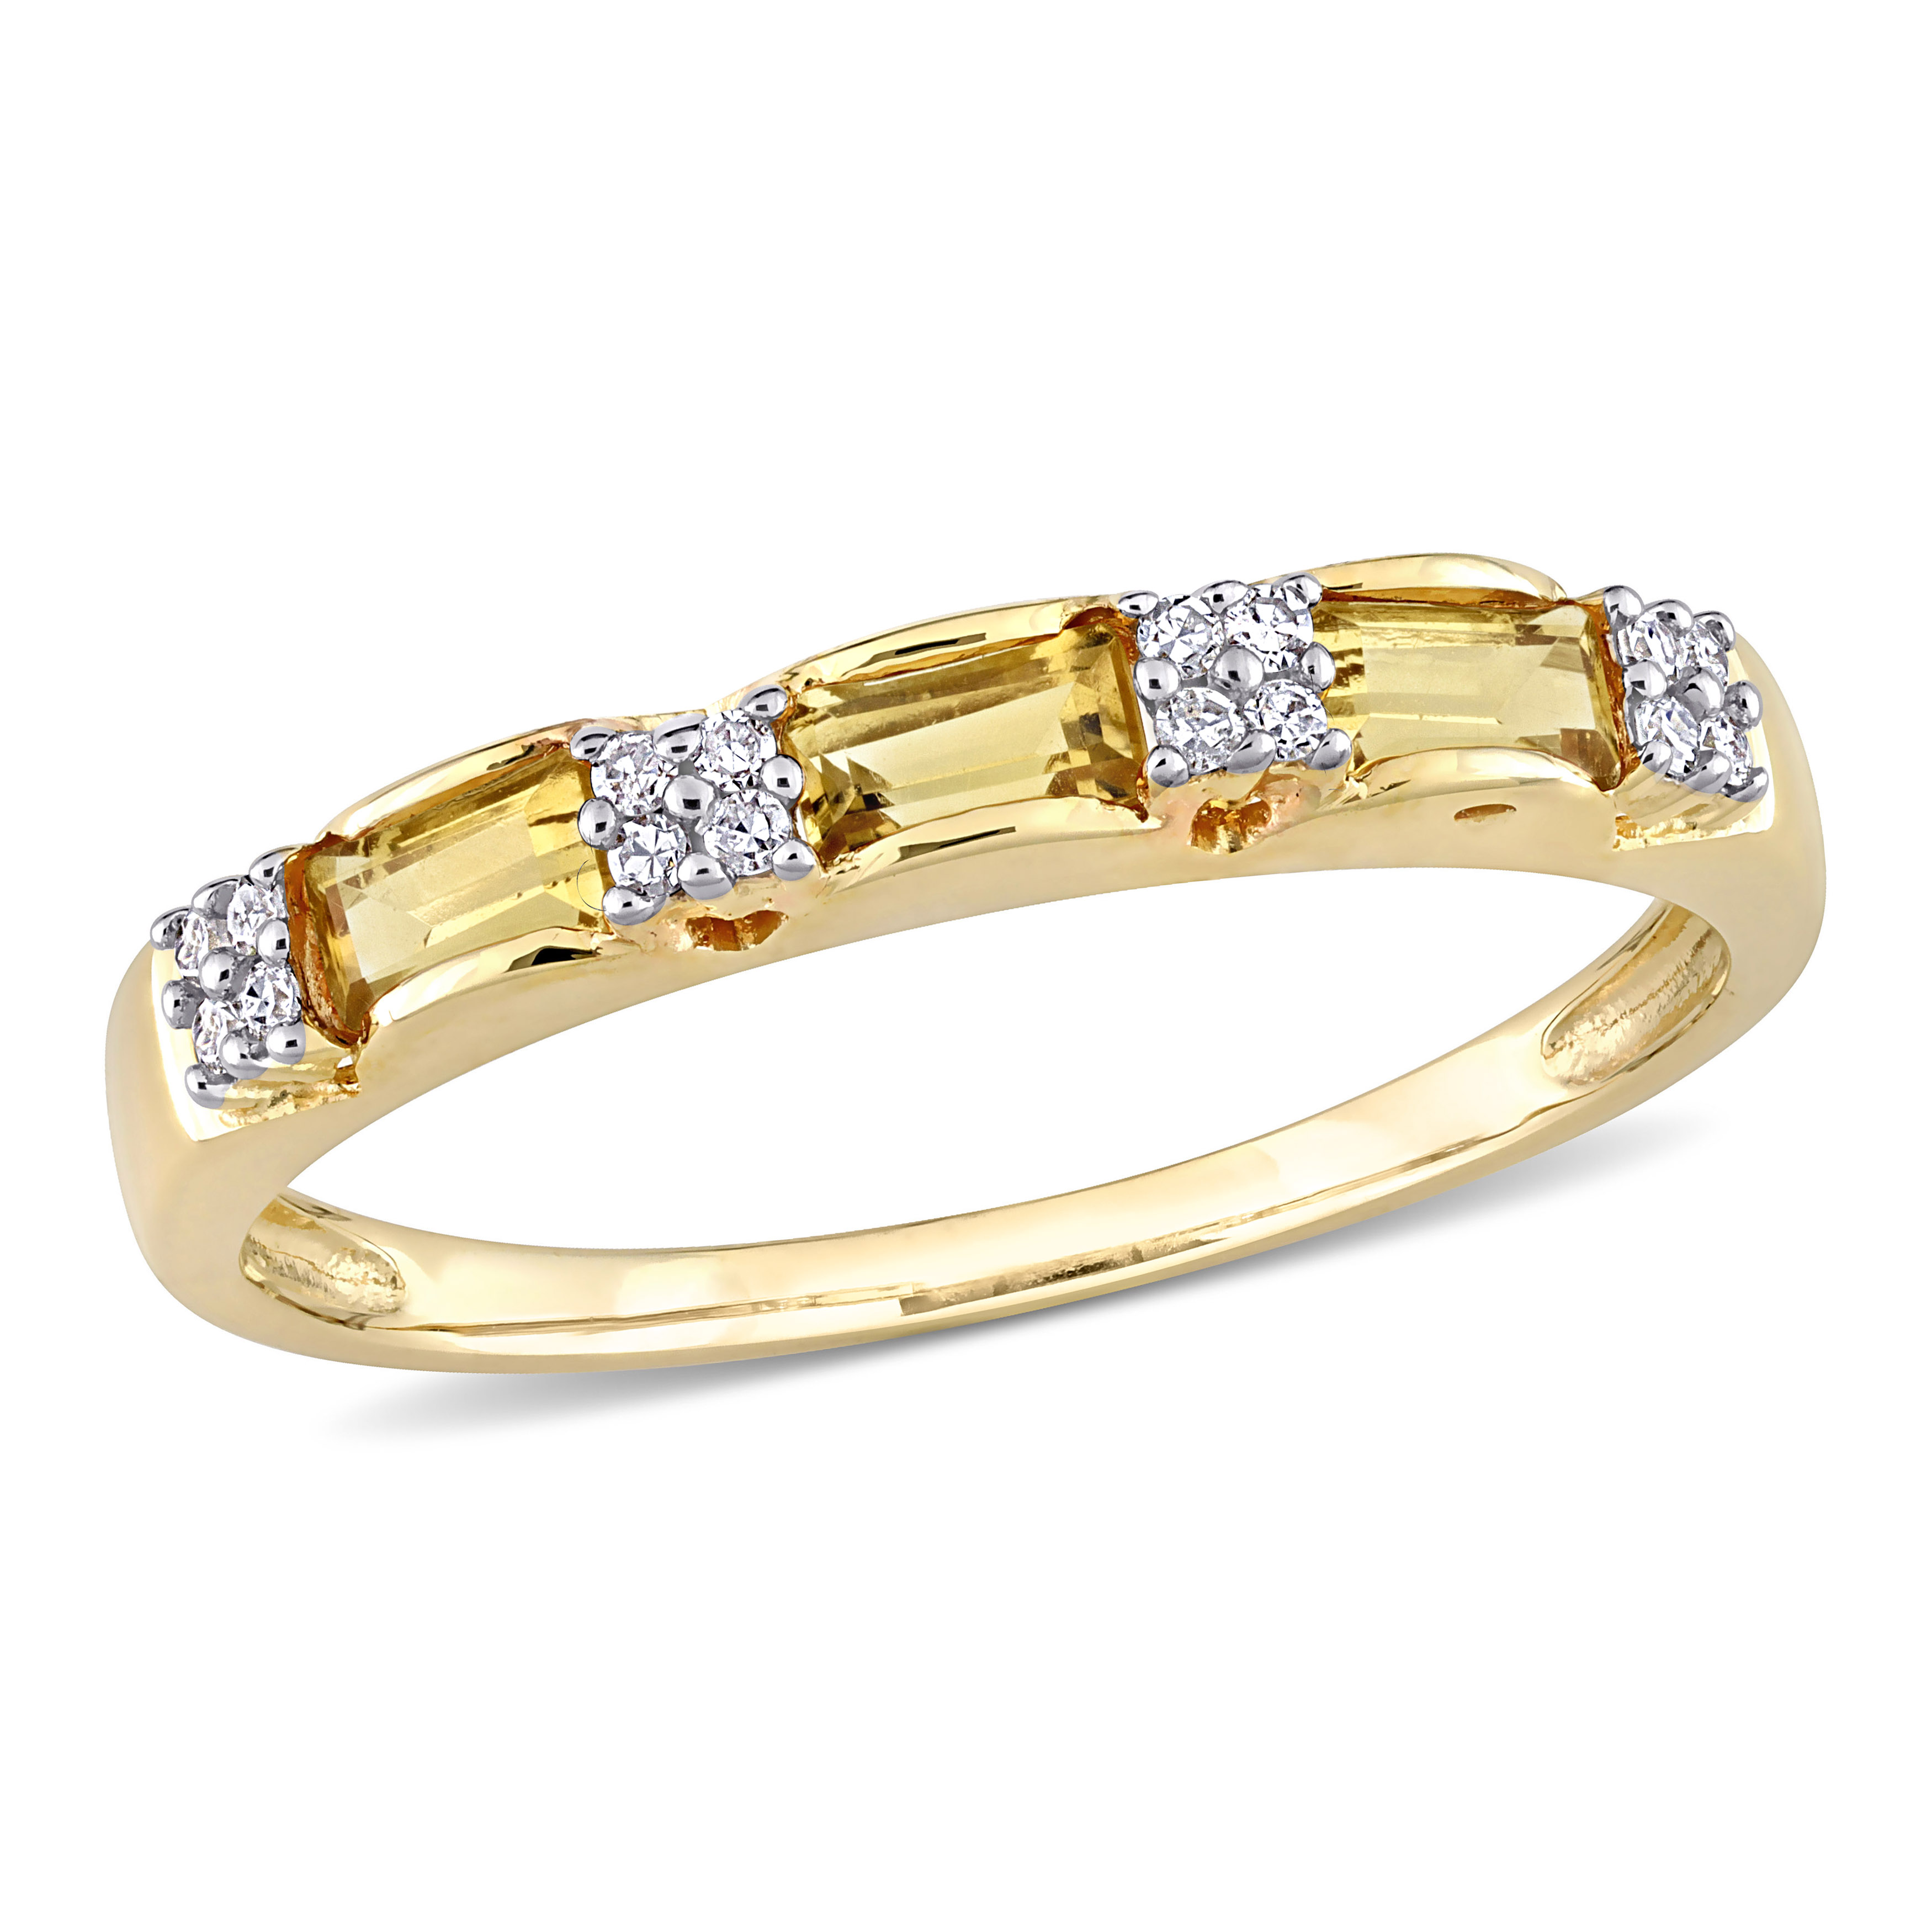 3/8 CT TGW Citrine and Diamond Accent Eternity Ring in 10k Yellow Gold